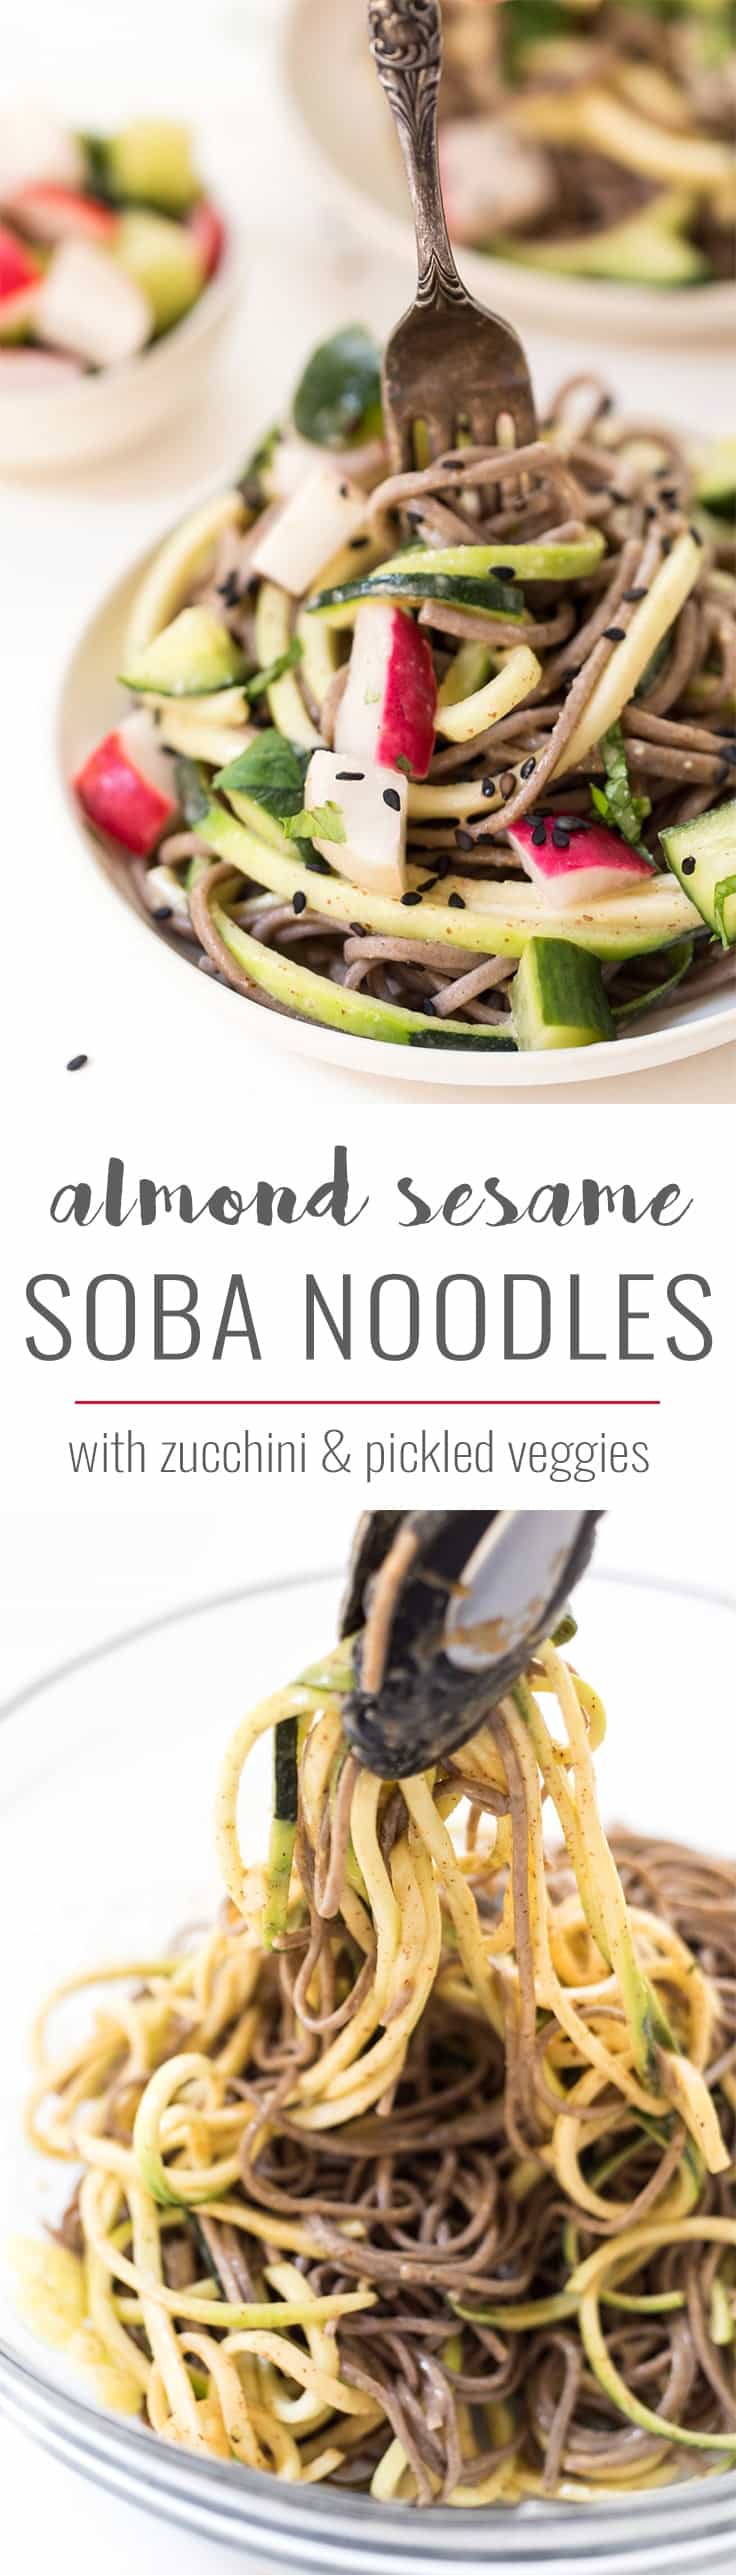 These almond-sesame soba noodles are the perfect fake-out take-out! Loaded with flavor and nutrients, then topped with bright pickled veggies!